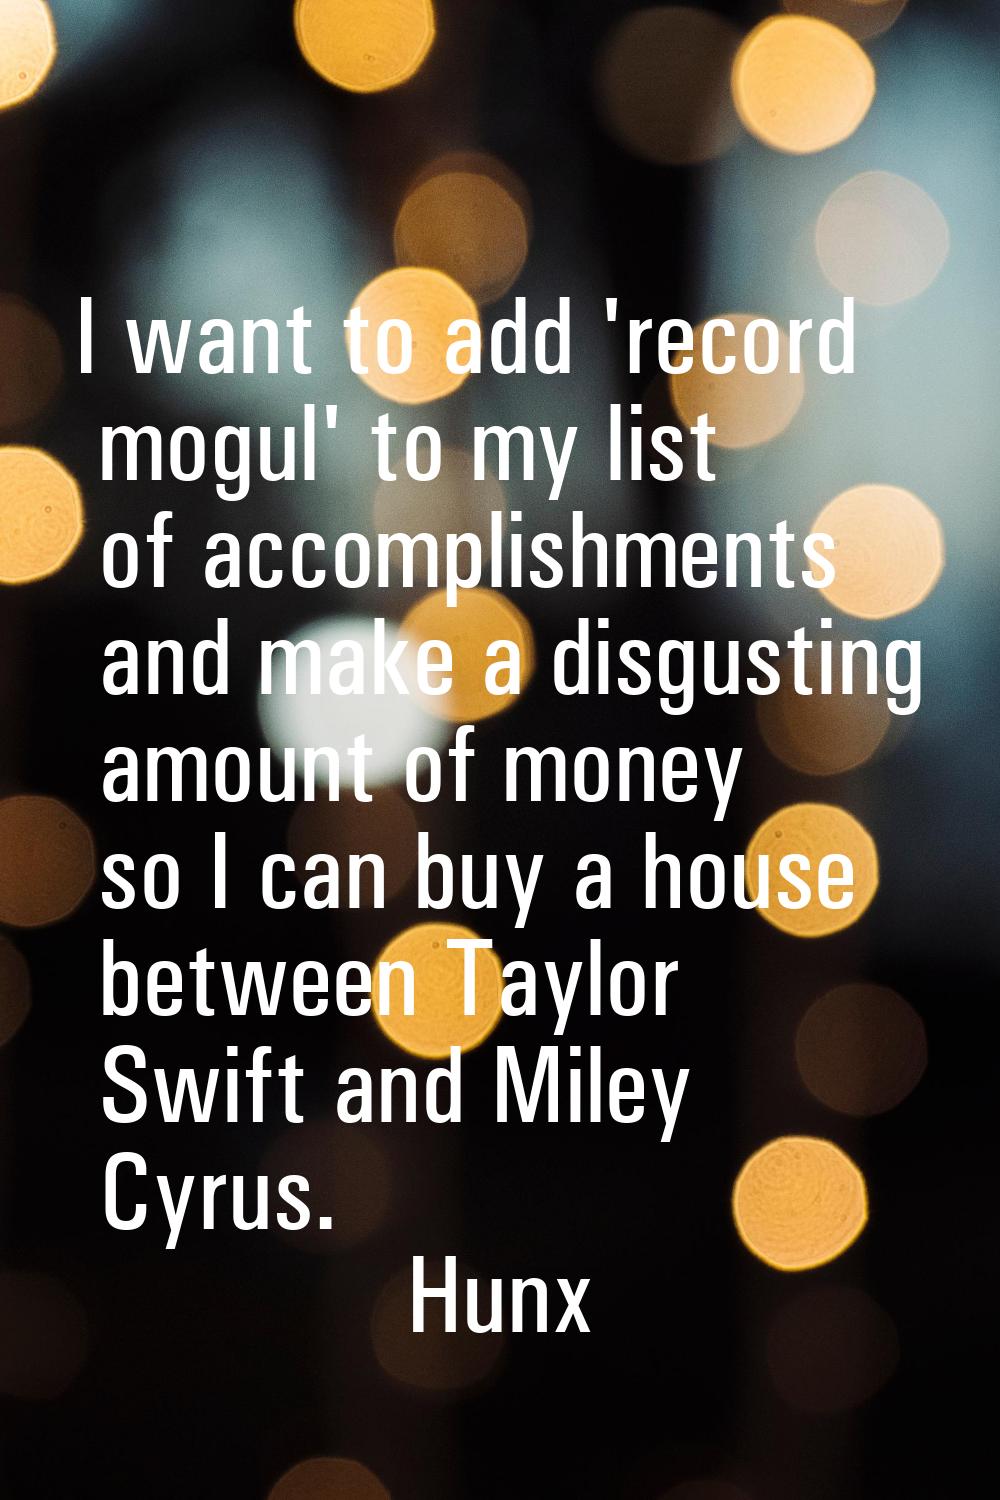 I want to add 'record mogul' to my list of accomplishments and make a disgusting amount of money so